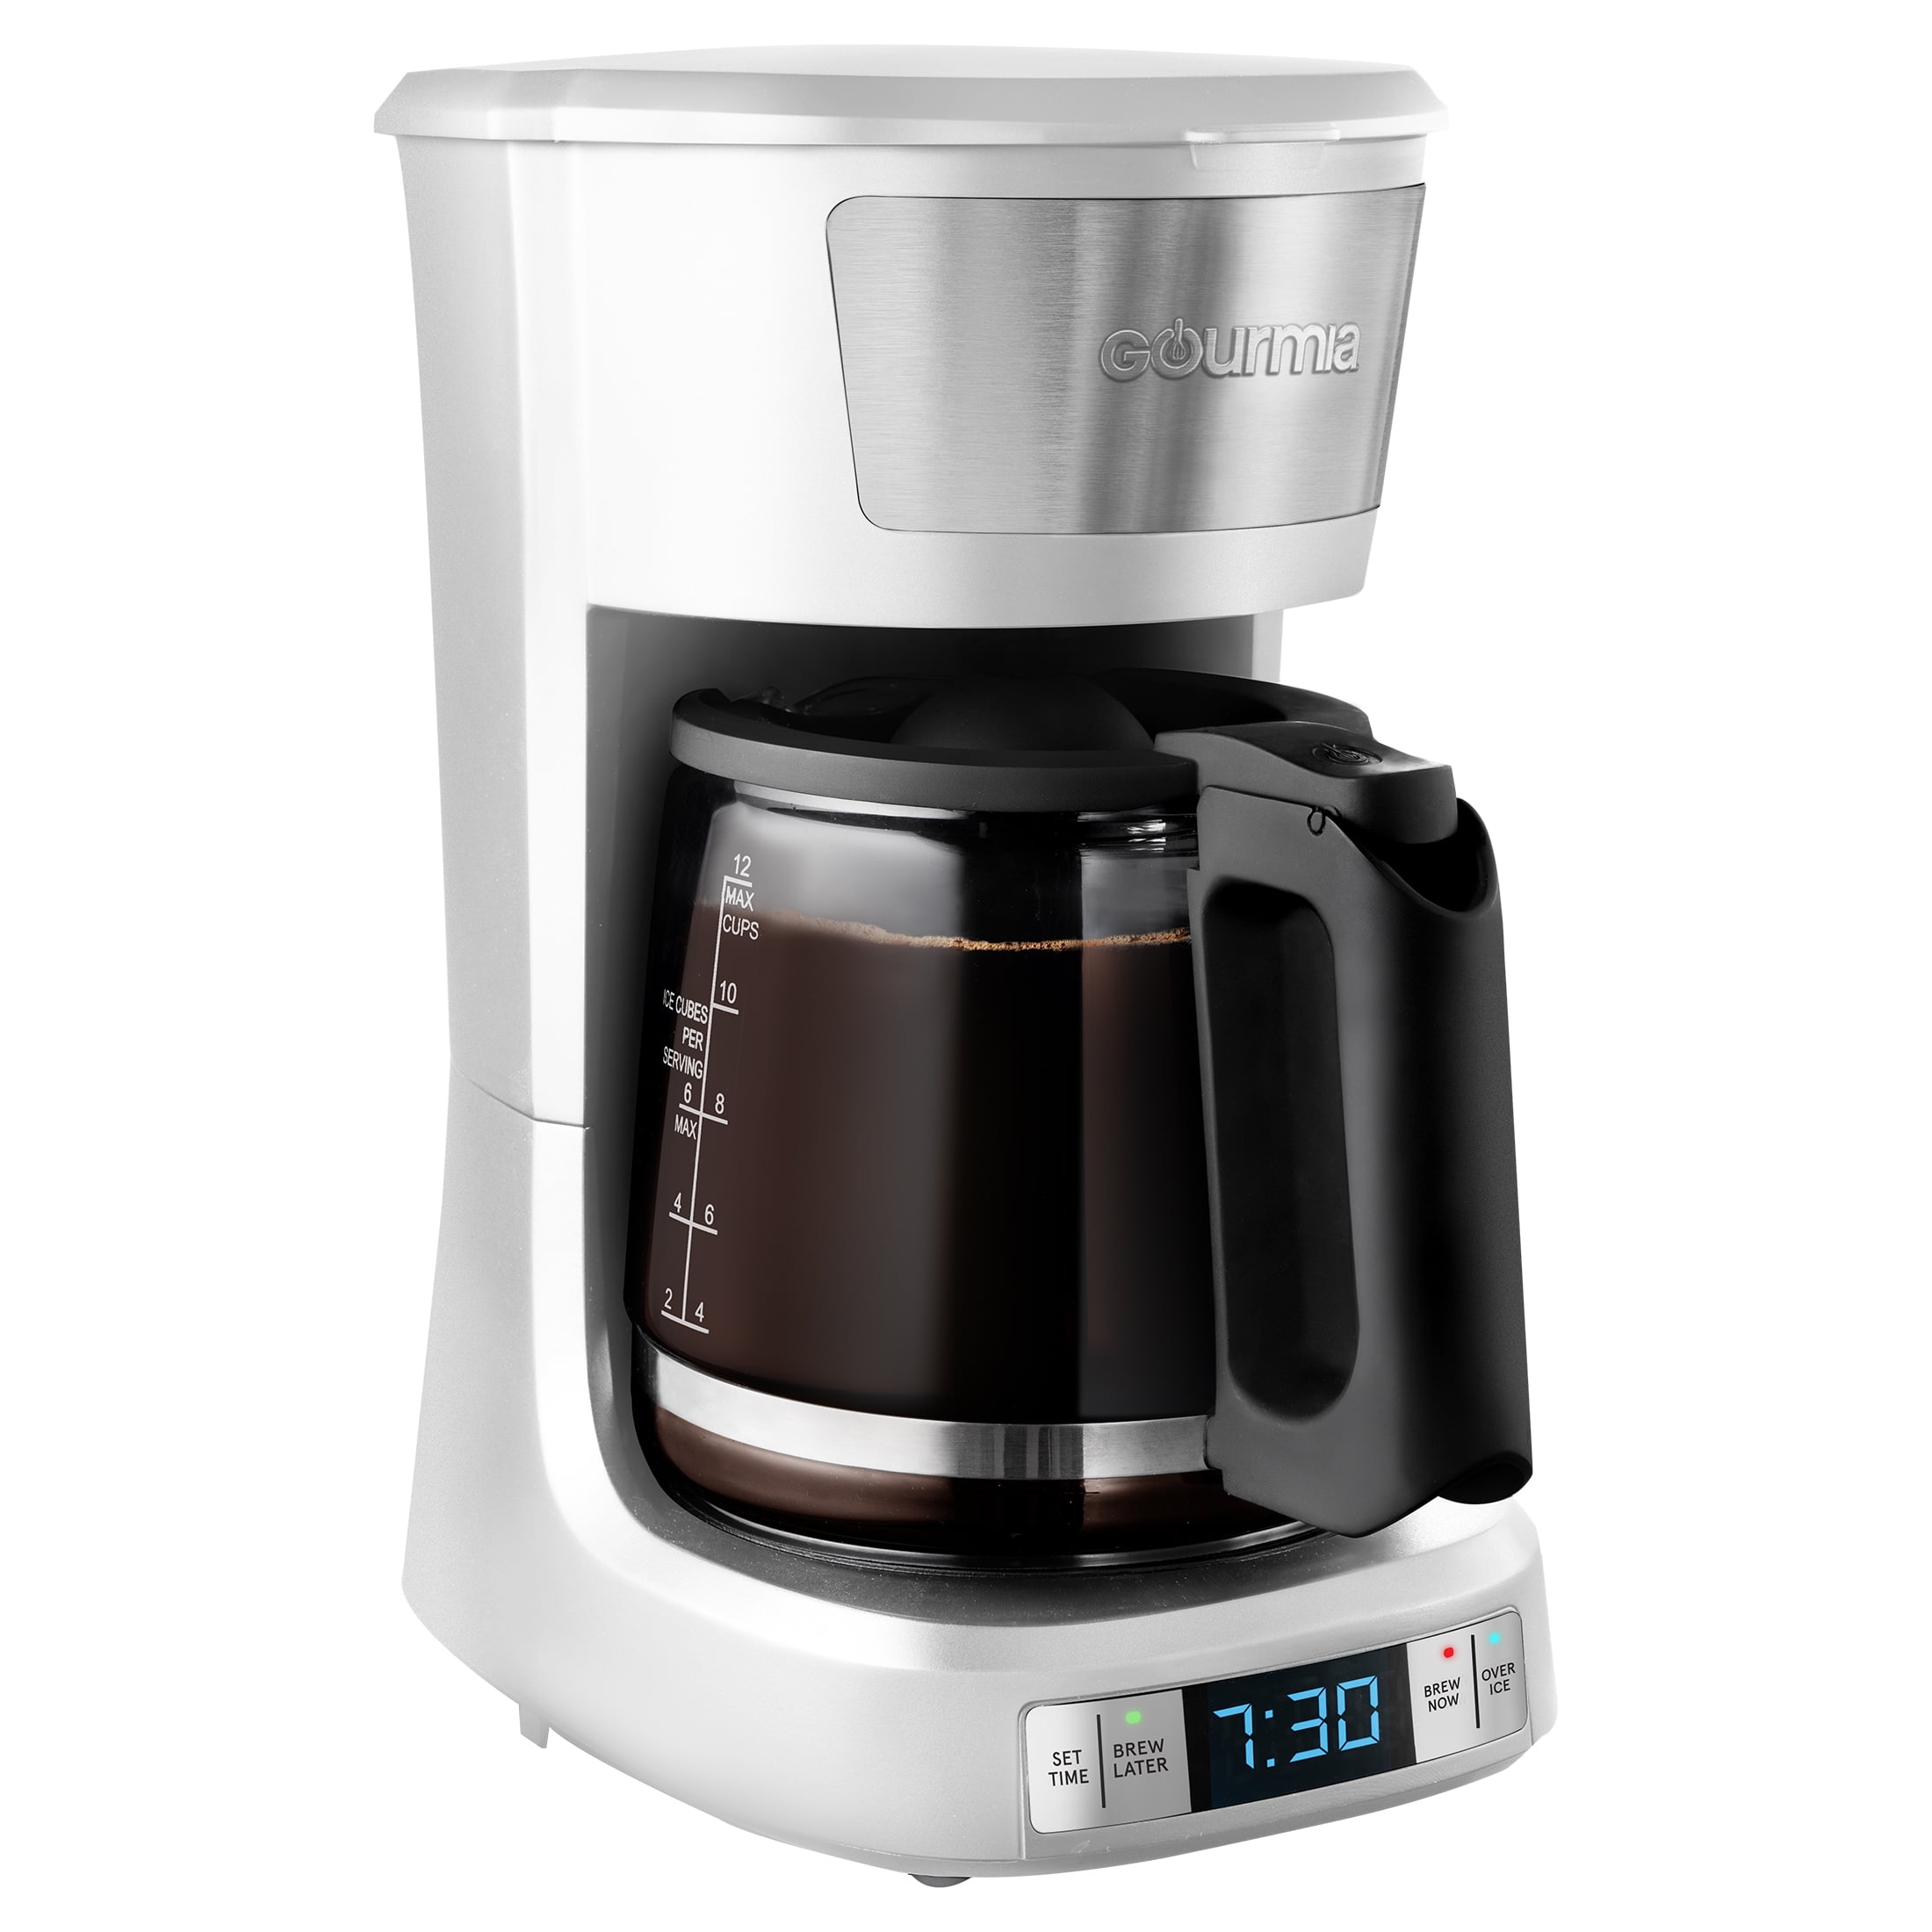 Cup Programmable Hot & Iced Coffeemaker, Stainless Steel Milk